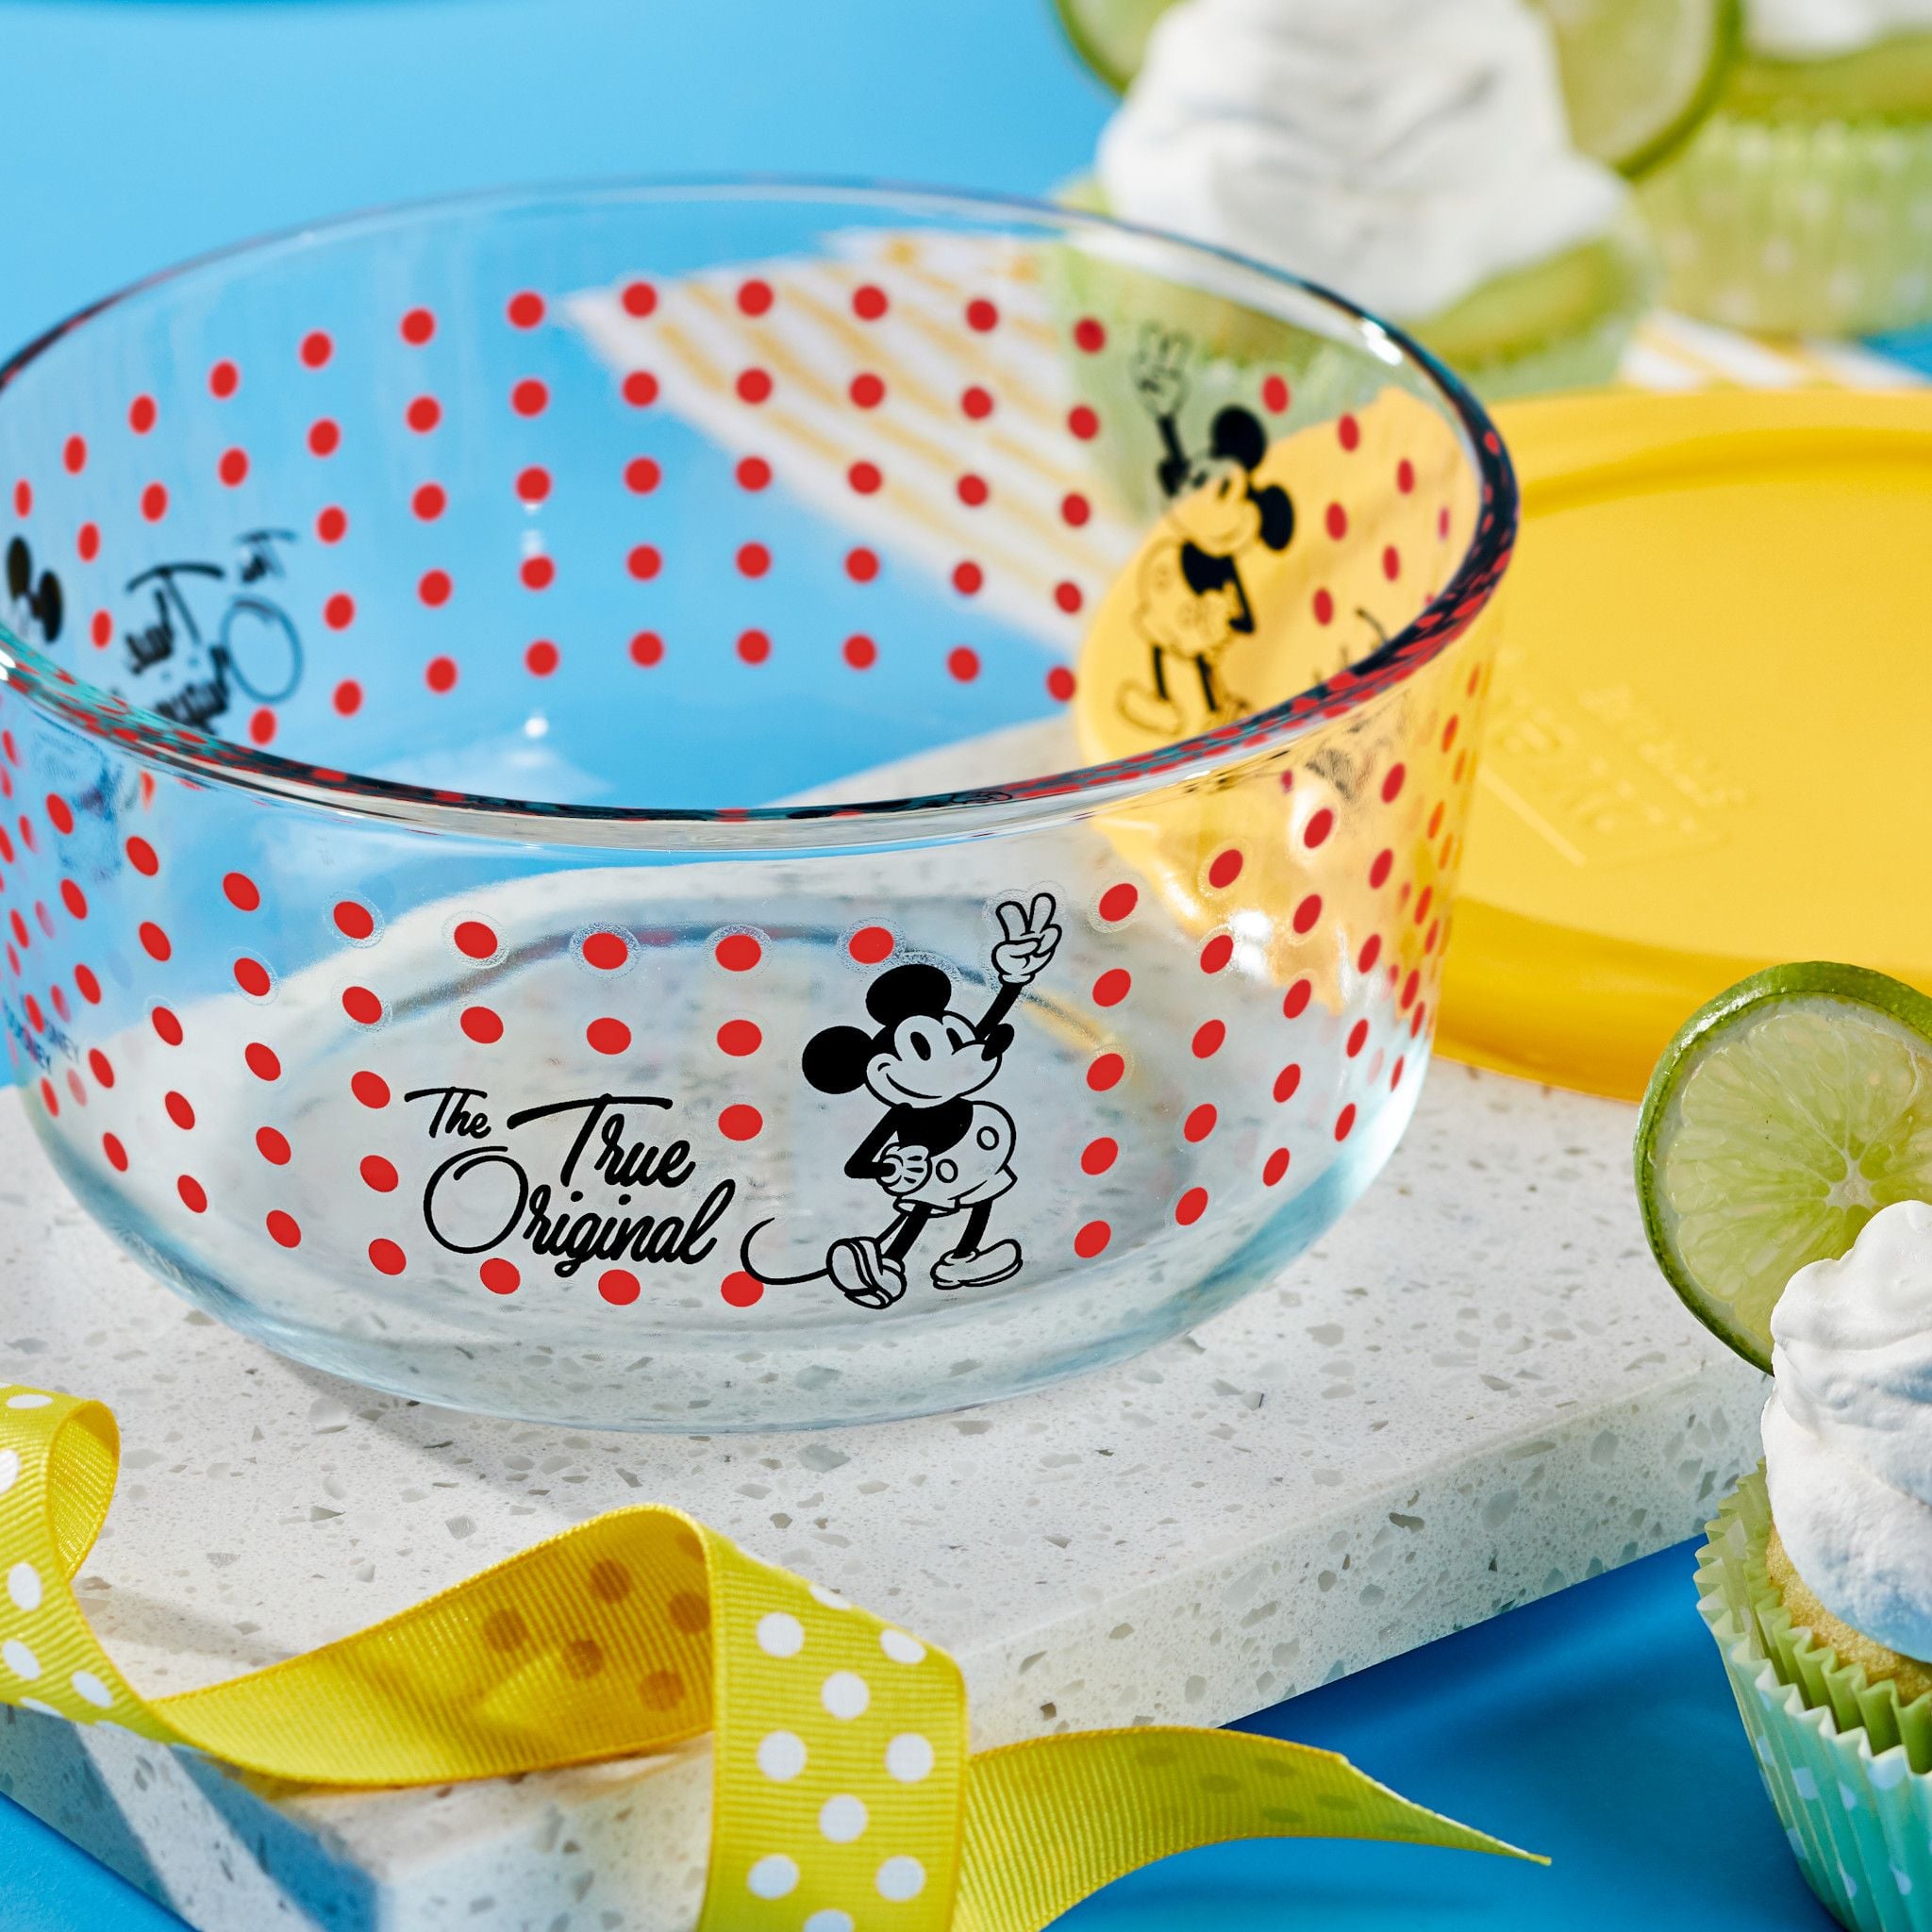 Mickey and Friends Pyrex Collection Will Add Some Magic to Your